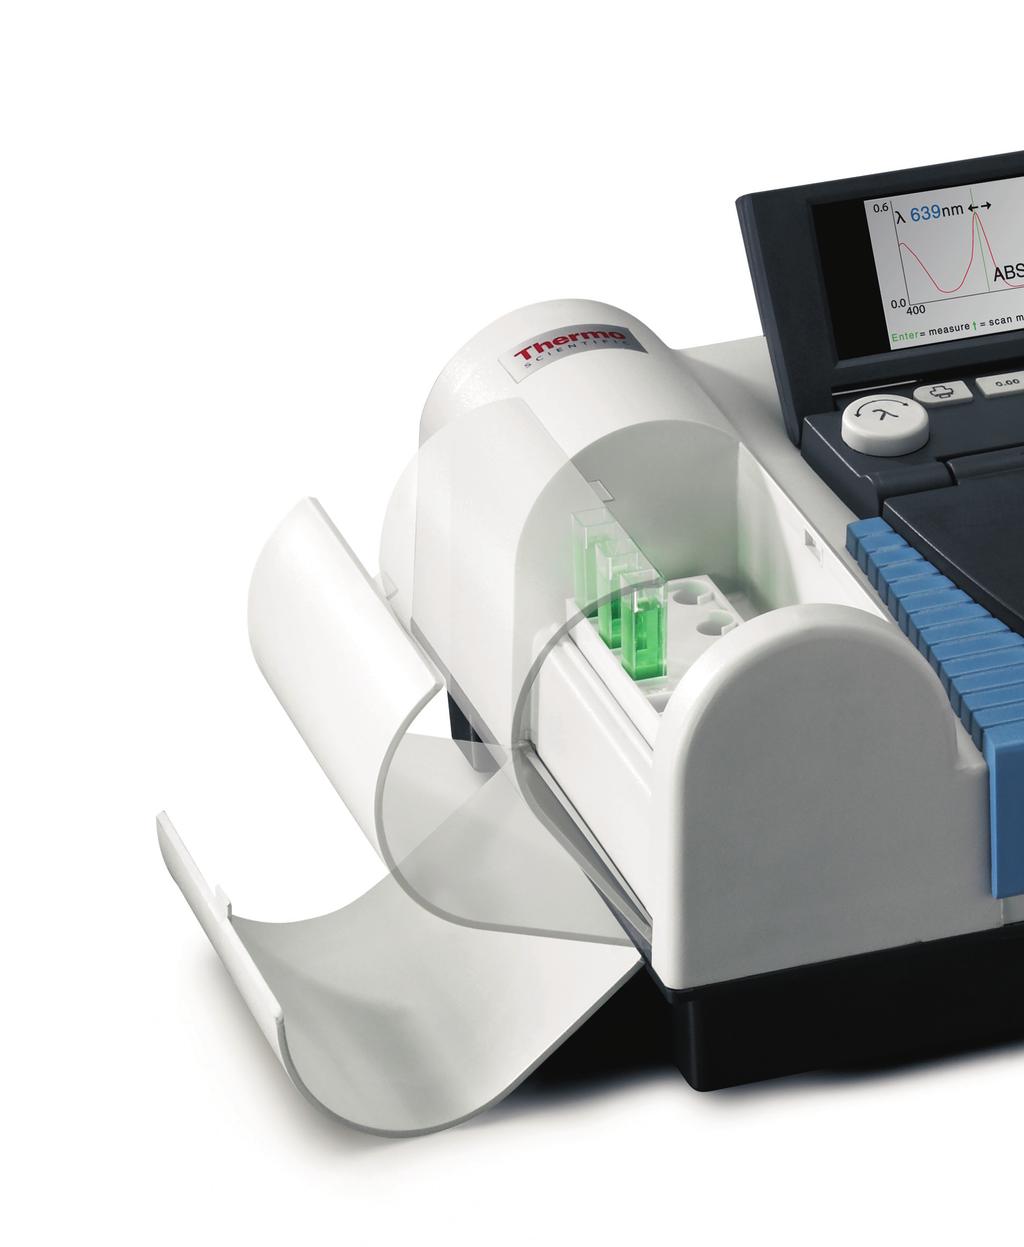 The Standard for Routine Measurements Thermo Scientific SPECTRONIC spectrophotometers have served as core analytical instruments in instructional and routine analytical laboratories since 1953.